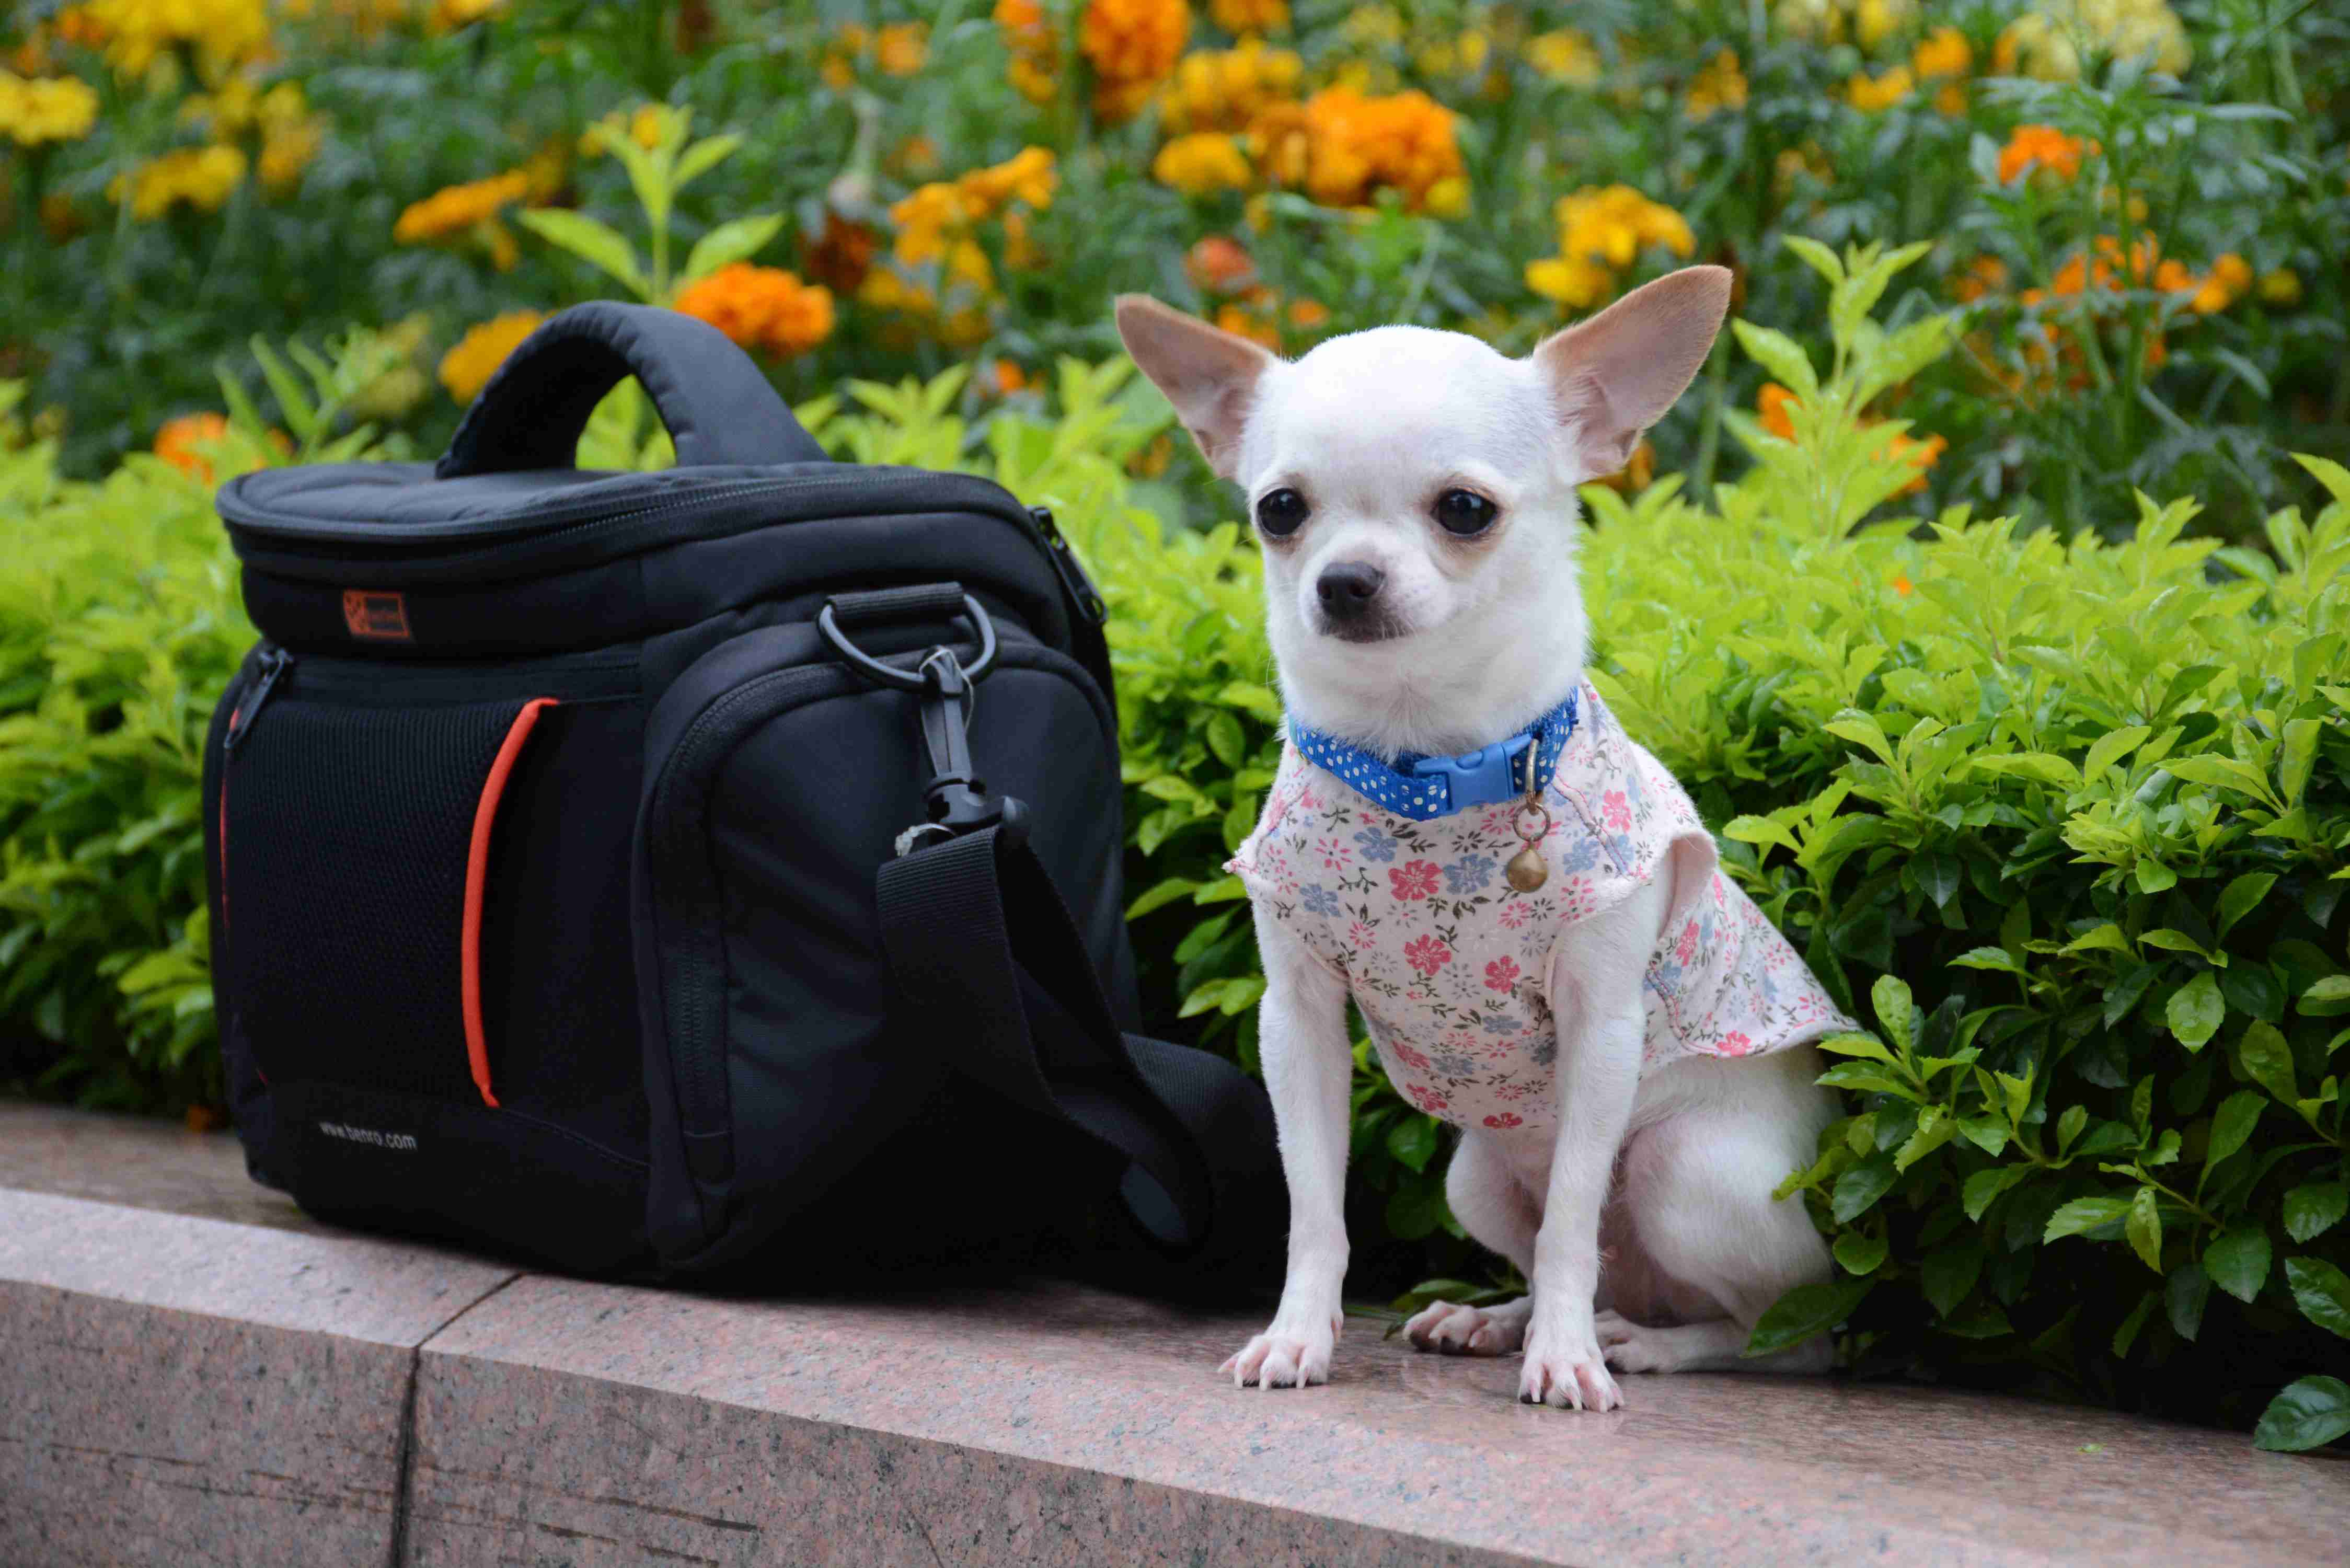 How can you create a calm and peaceful environment for a Chihuahua with anger issues?